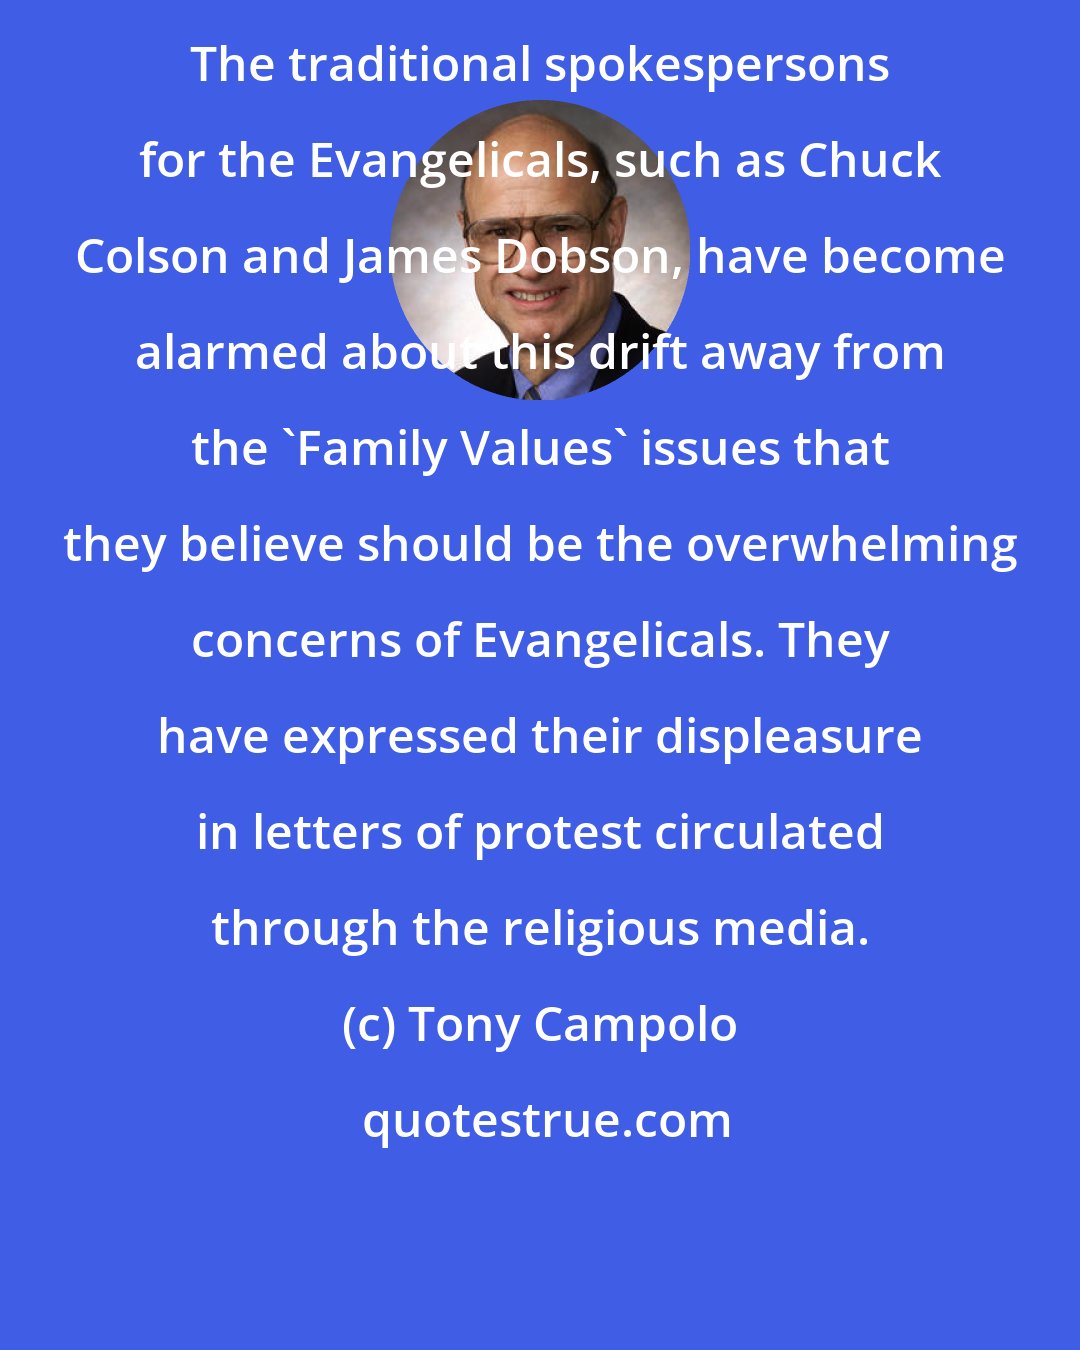 Tony Campolo: The traditional spokespersons for the Evangelicals, such as Chuck Colson and James Dobson, have become alarmed about this drift away from the 'Family Values' issues that they believe should be the overwhelming concerns of Evangelicals. They have expressed their displeasure in letters of protest circulated through the religious media.